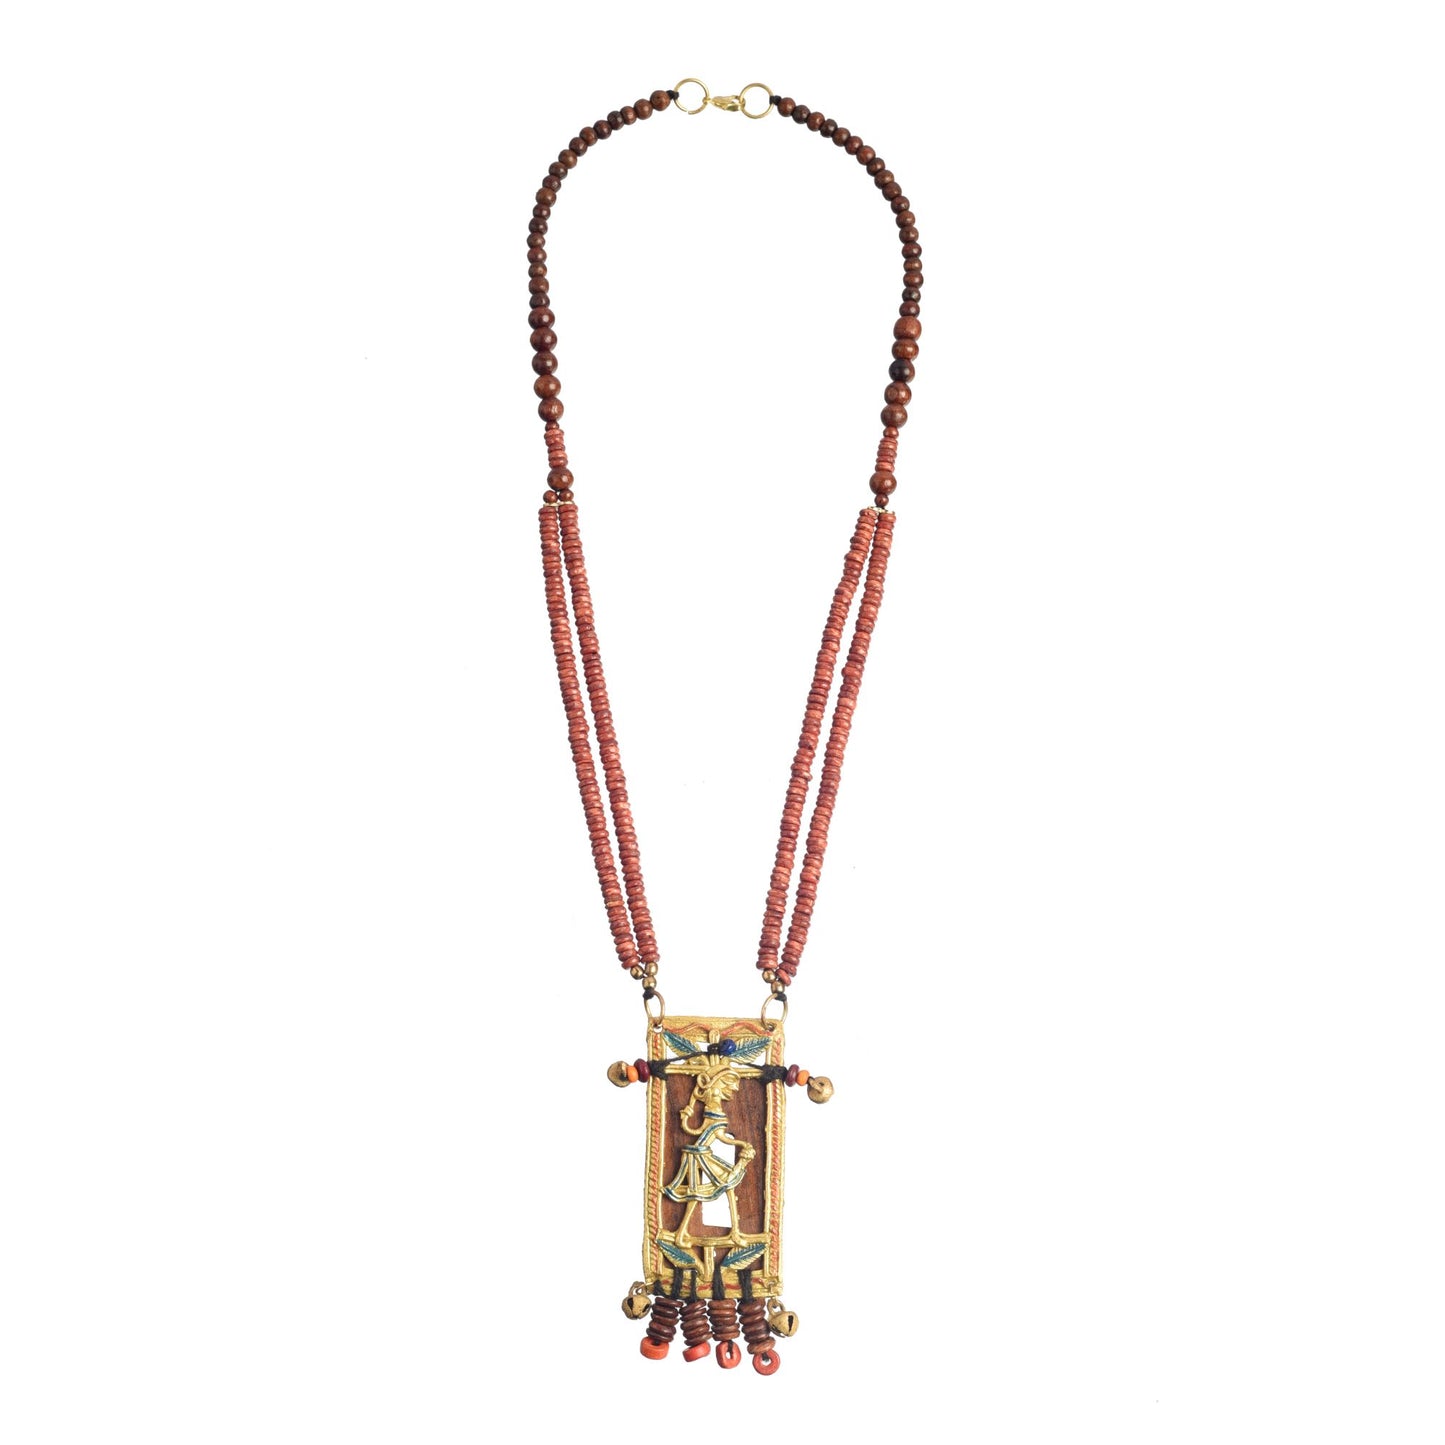 The Royal Parade Handcrafted Tribal Necklace